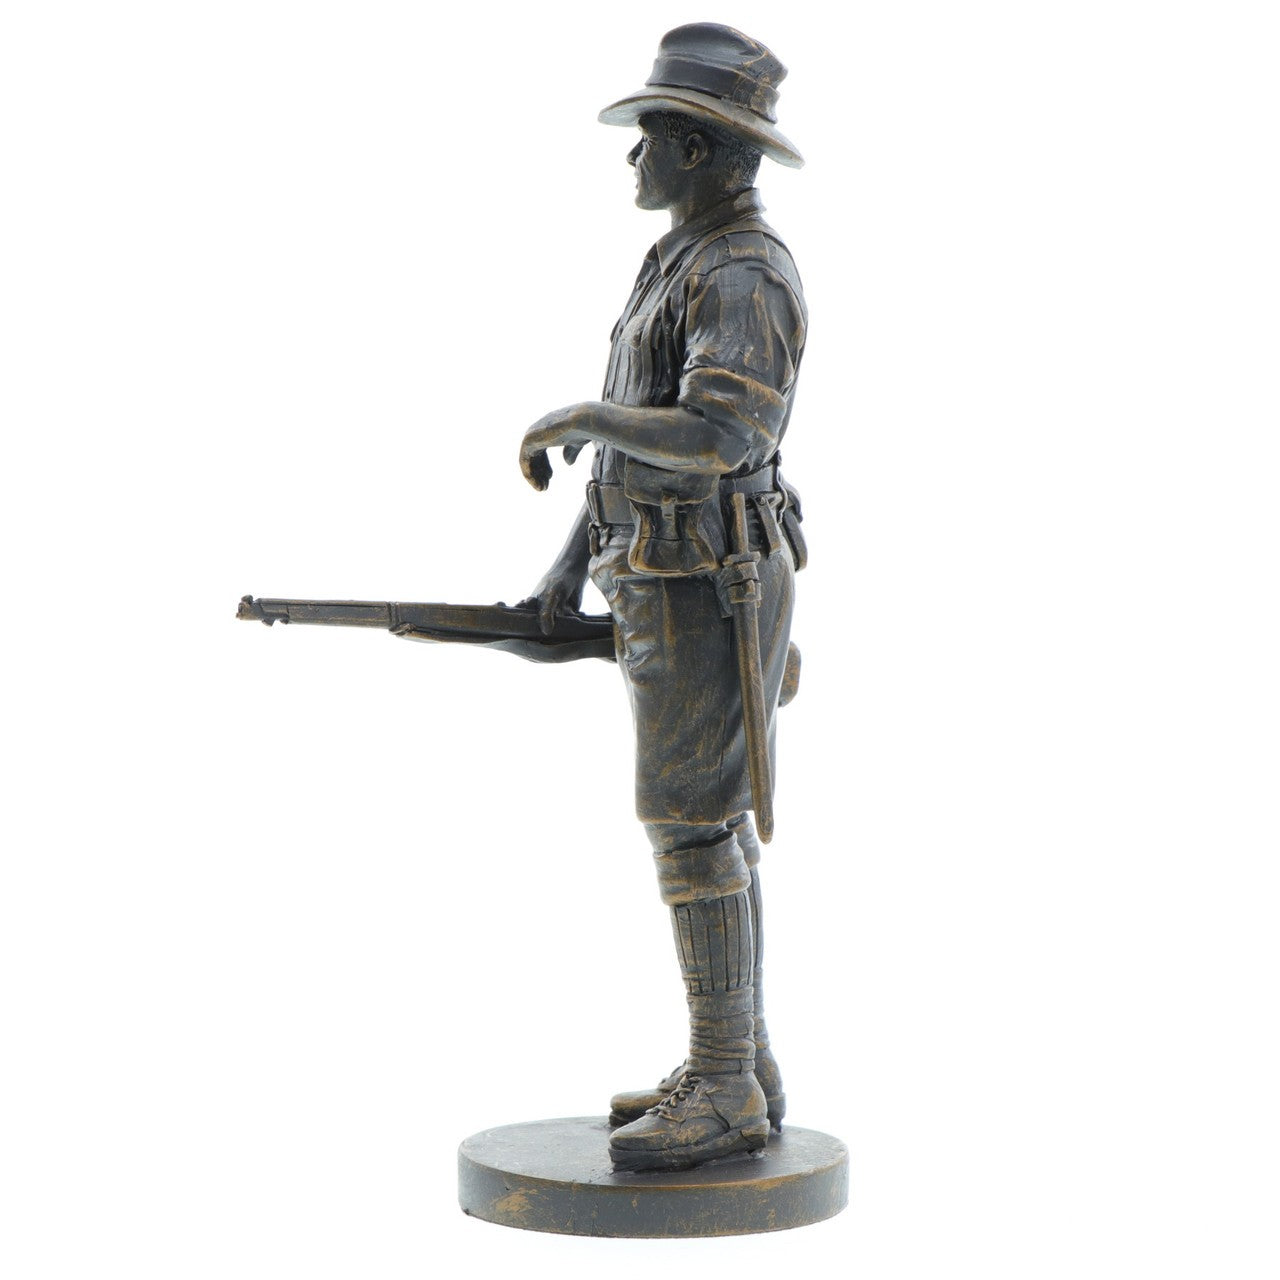 MASTER CREATIONS PACIFIC THEATRE WWII DIGGER MINIATURE FIGURINE 21CM